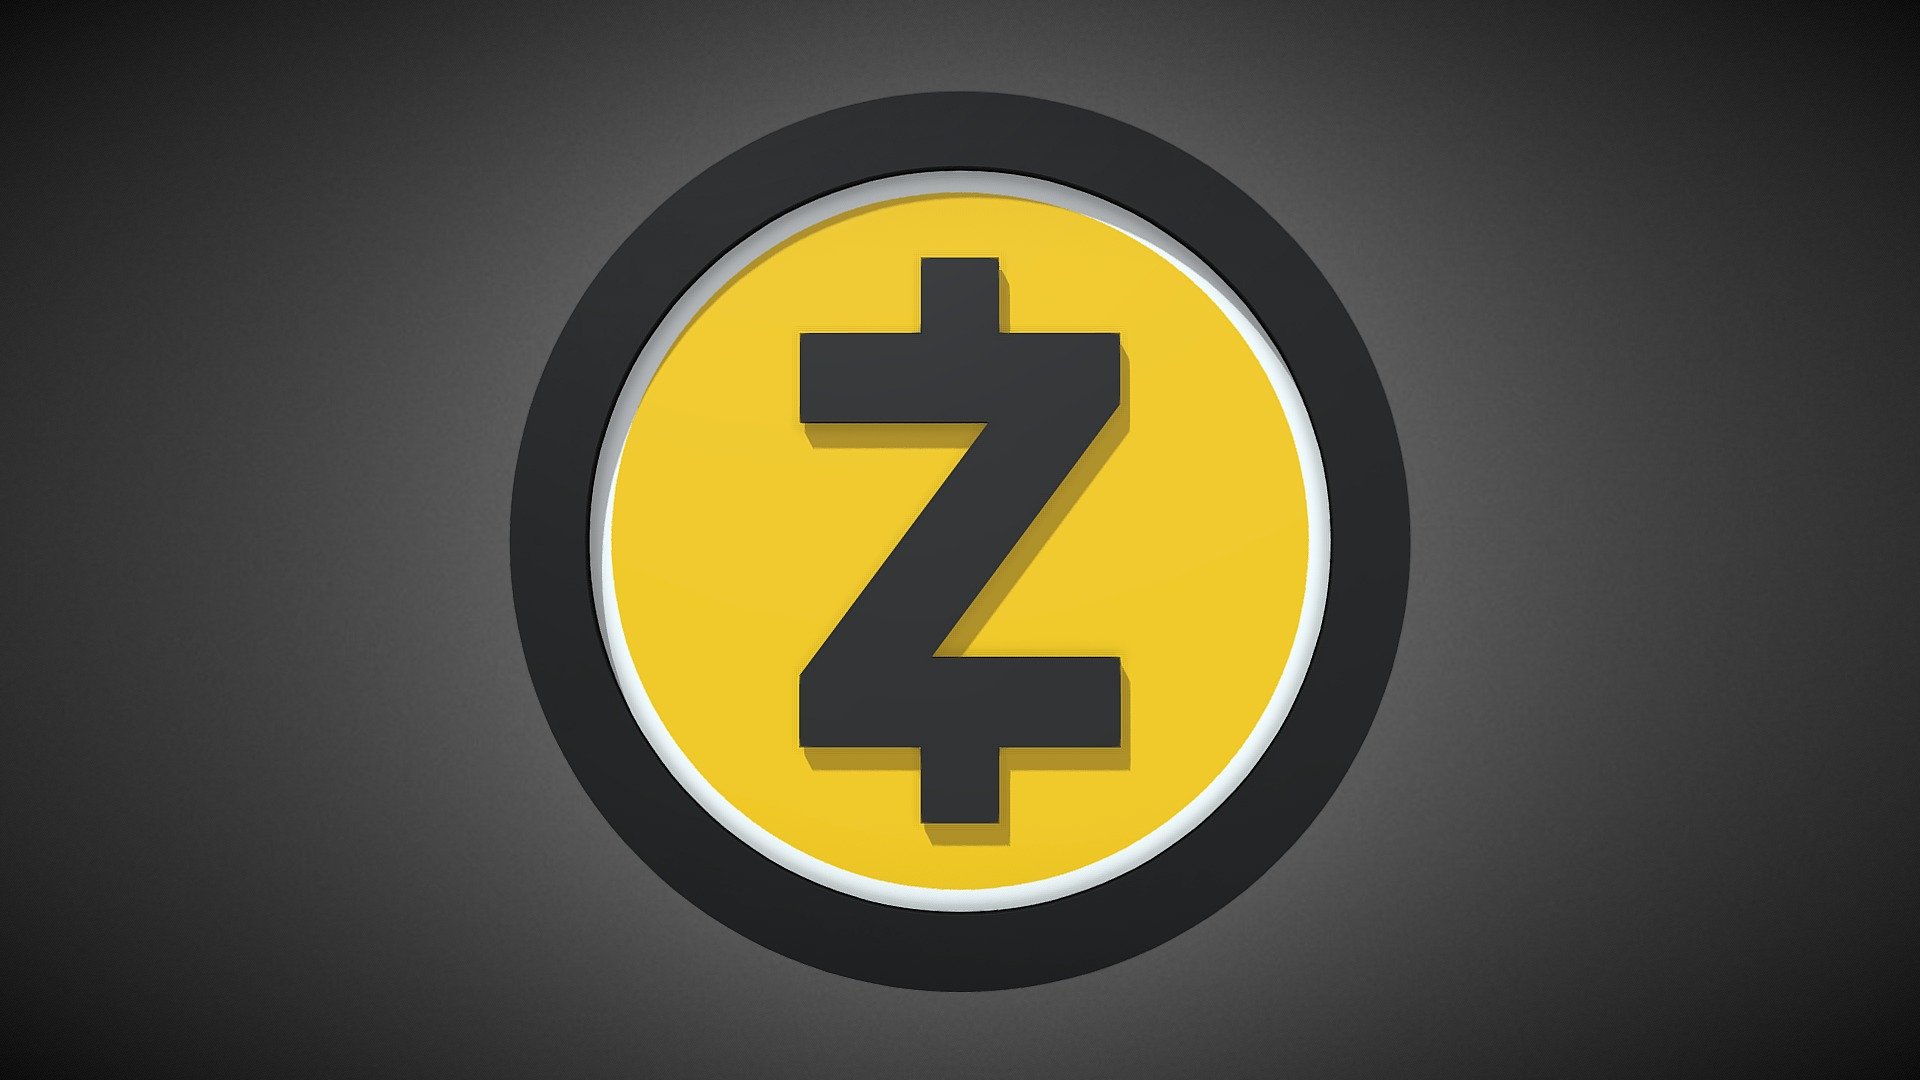 The ZCash cryptocurrency icon/logo made into a 3D coin.


Blender file and textures folder is included.
FBX file has textures embedded.

The textures are Matte Plastic Yellow with a white ring, Glossy Plastic Dark Grey, and Aluminum Dark Grey - ZCASH - Buy Royalty Free 3D model by AnshiNoWara 3d model